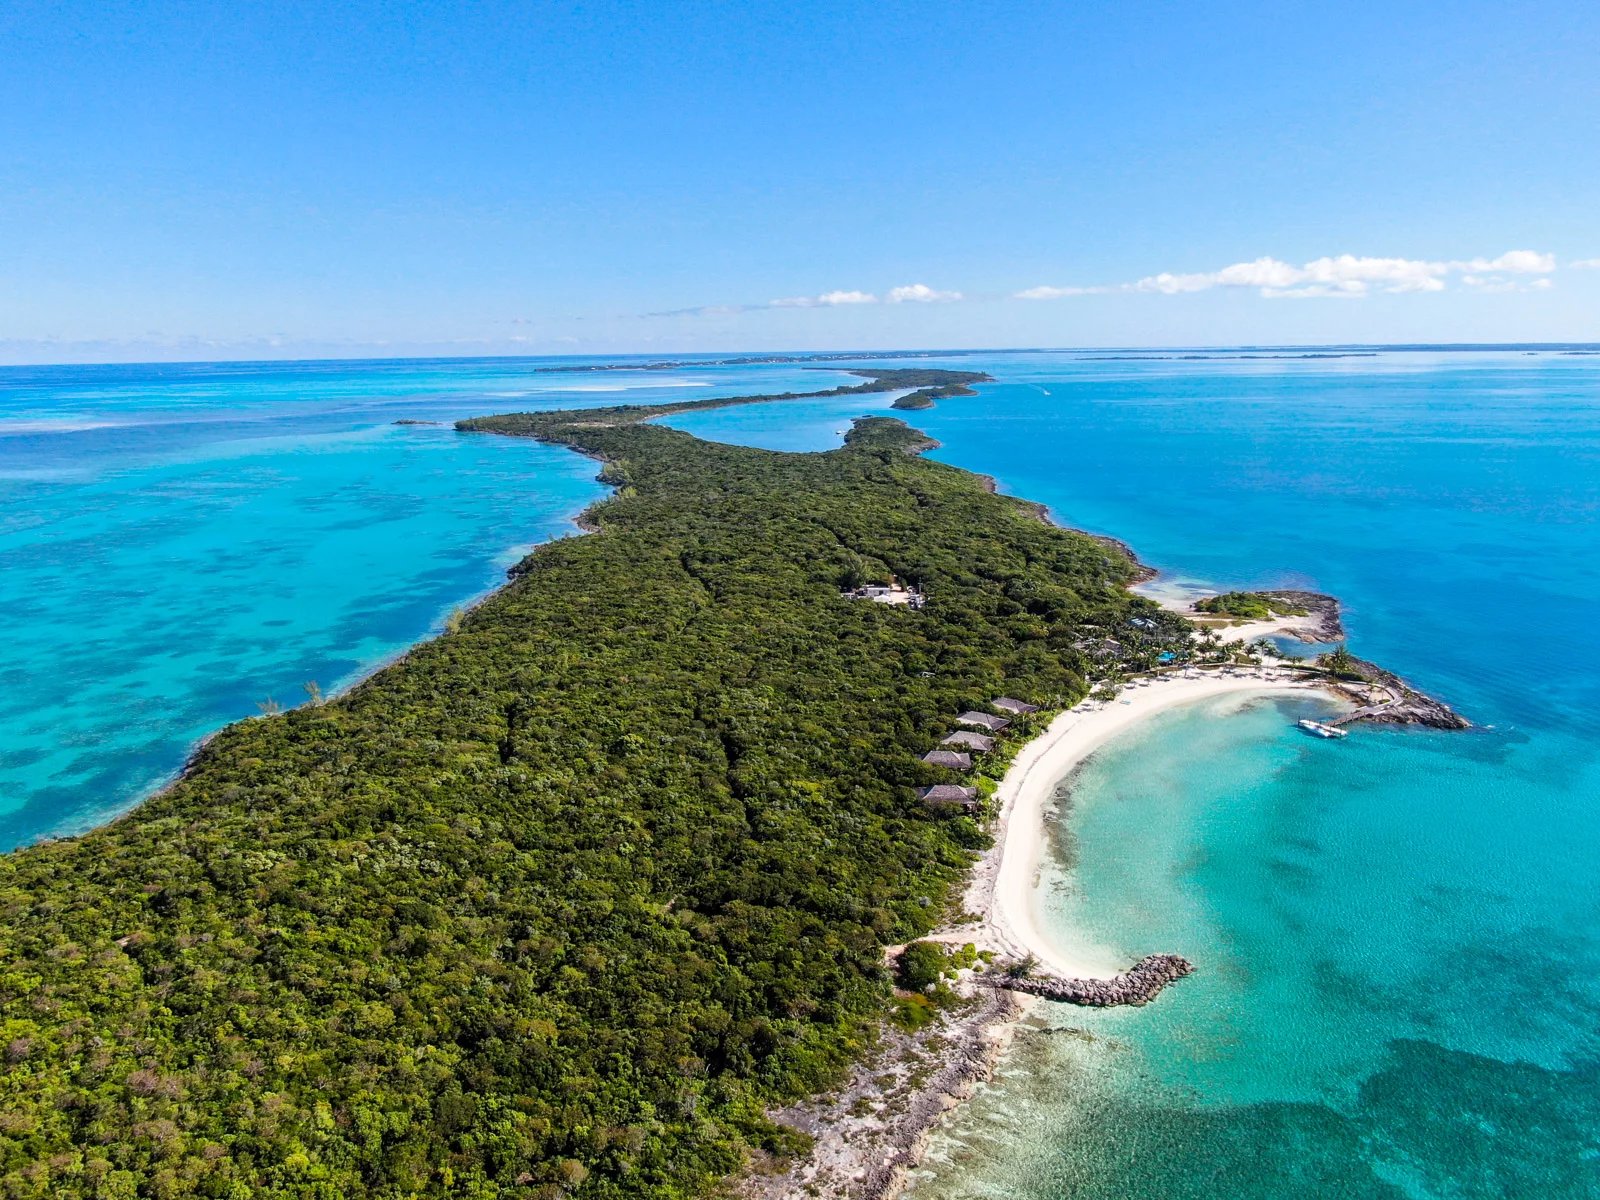 royal island, the perfect private island opportunity - mls 51444 image2